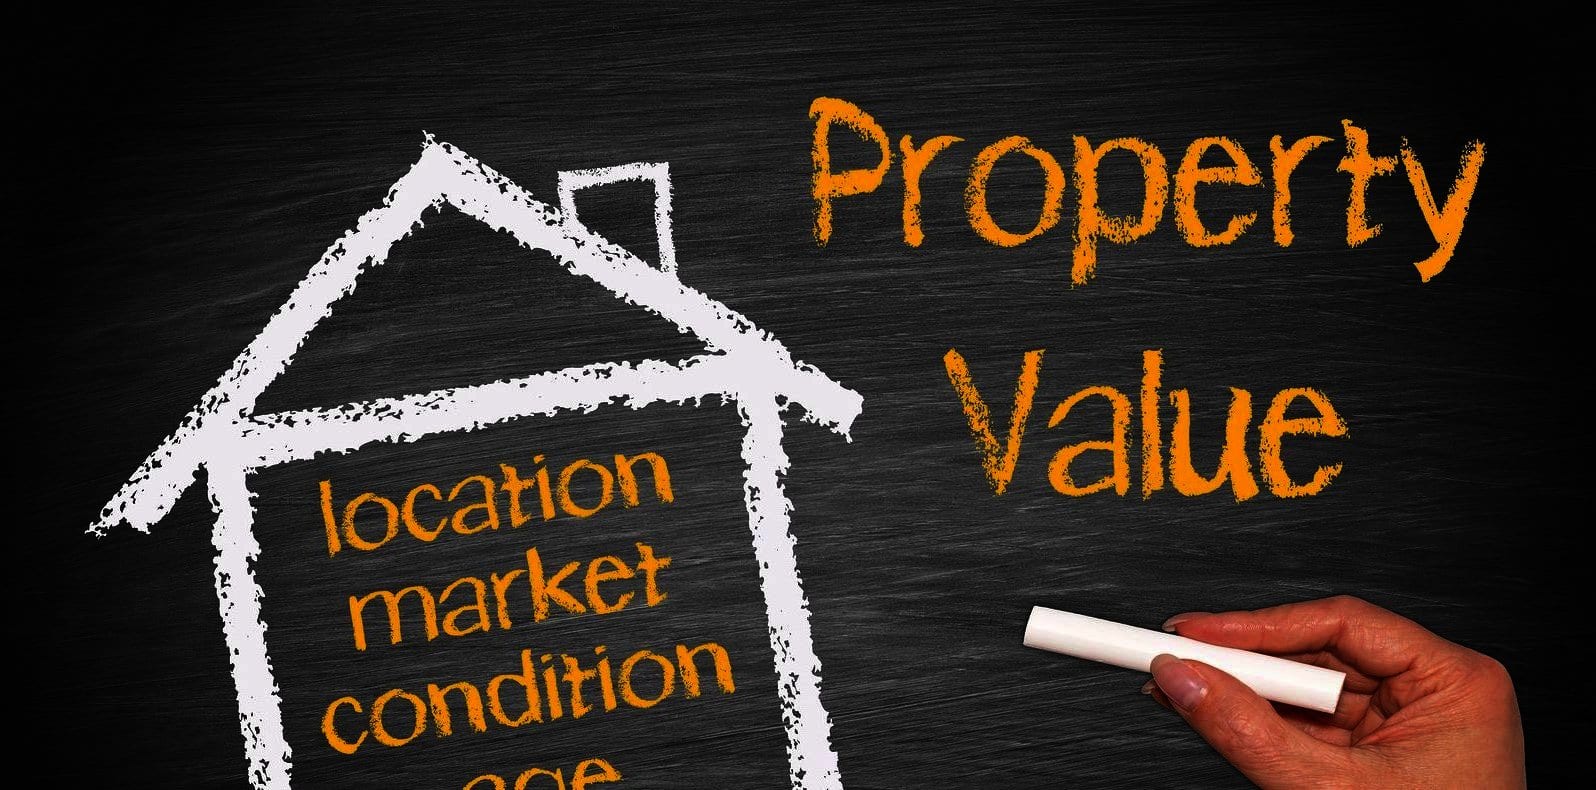 property-valuation